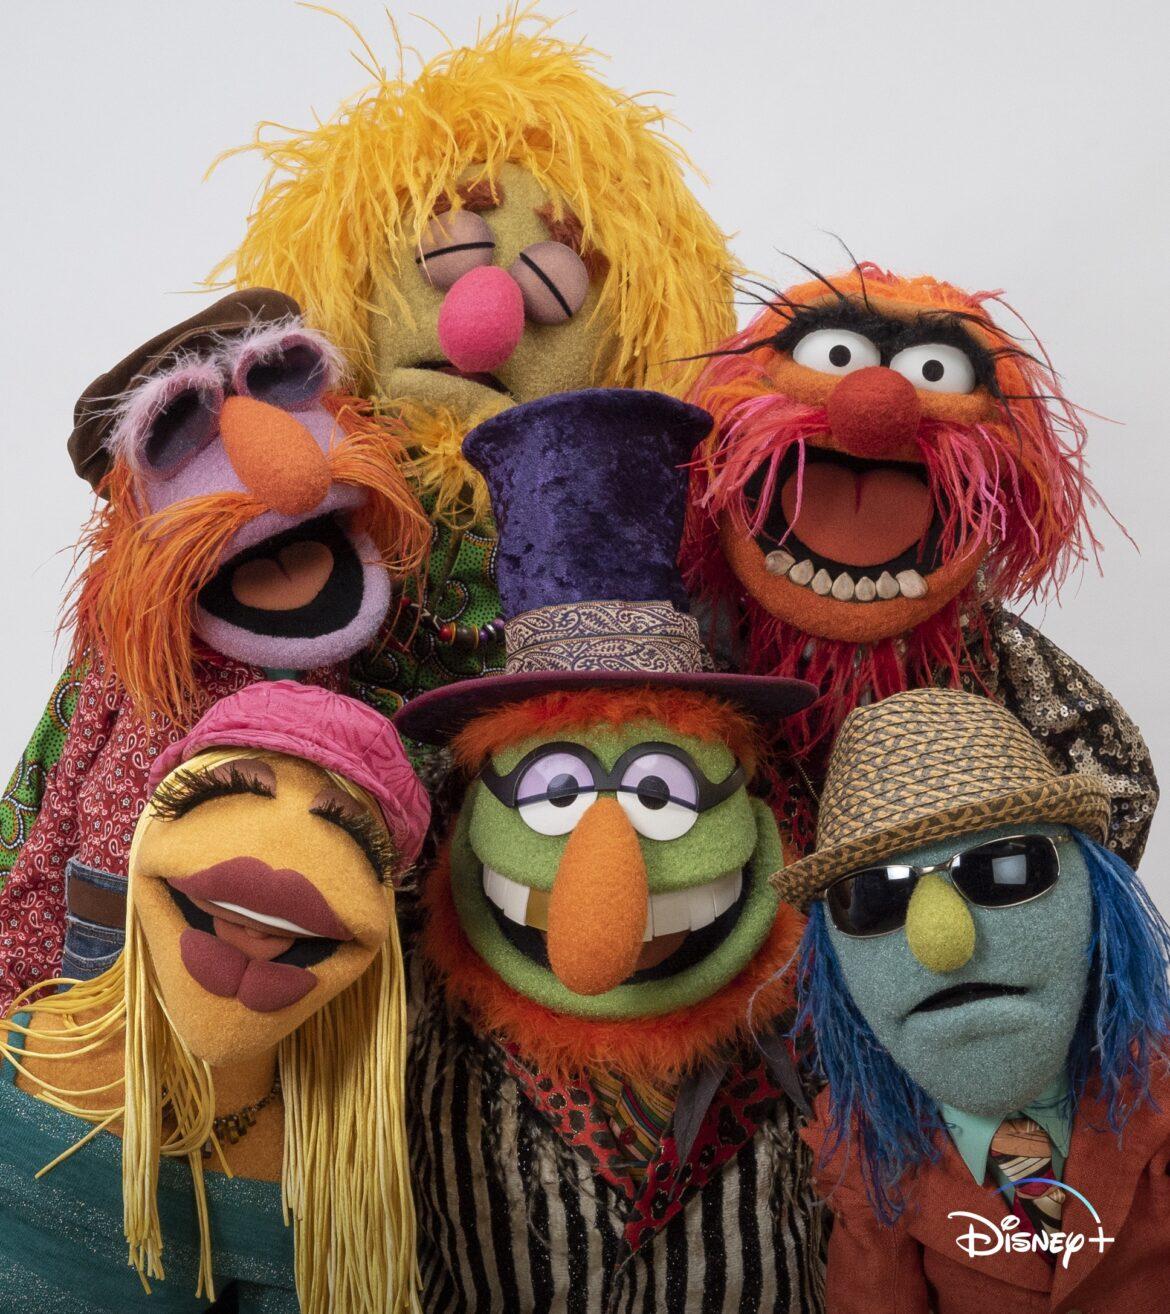 Muppet Comedy Series ‘The Muppets Mayhem’ coming to Disney+